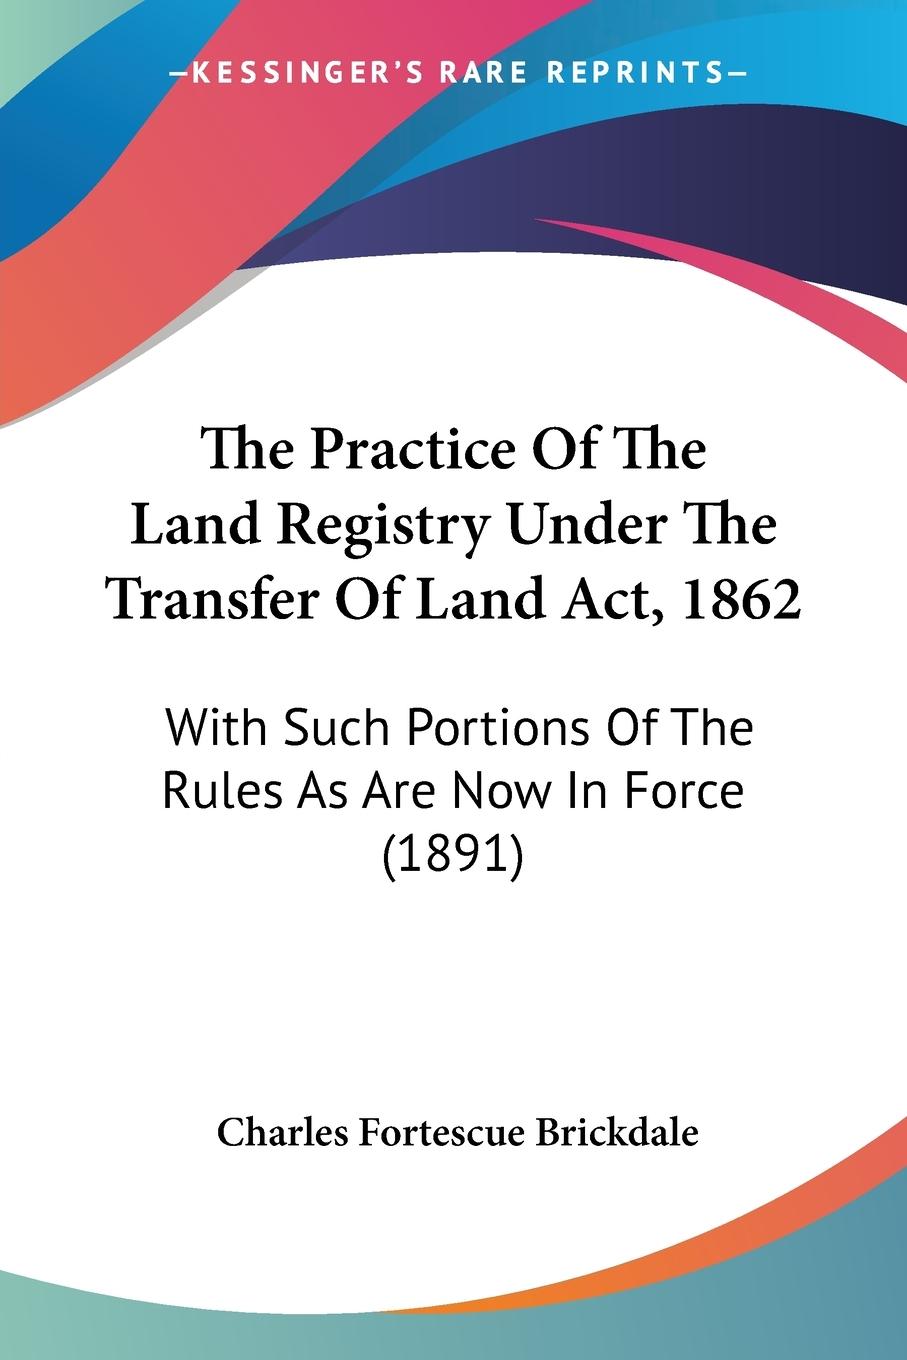 The Practice Of The Land Registry Under The Transfer Of Land Act, 1862 - Brickdale, Charles Fortescue